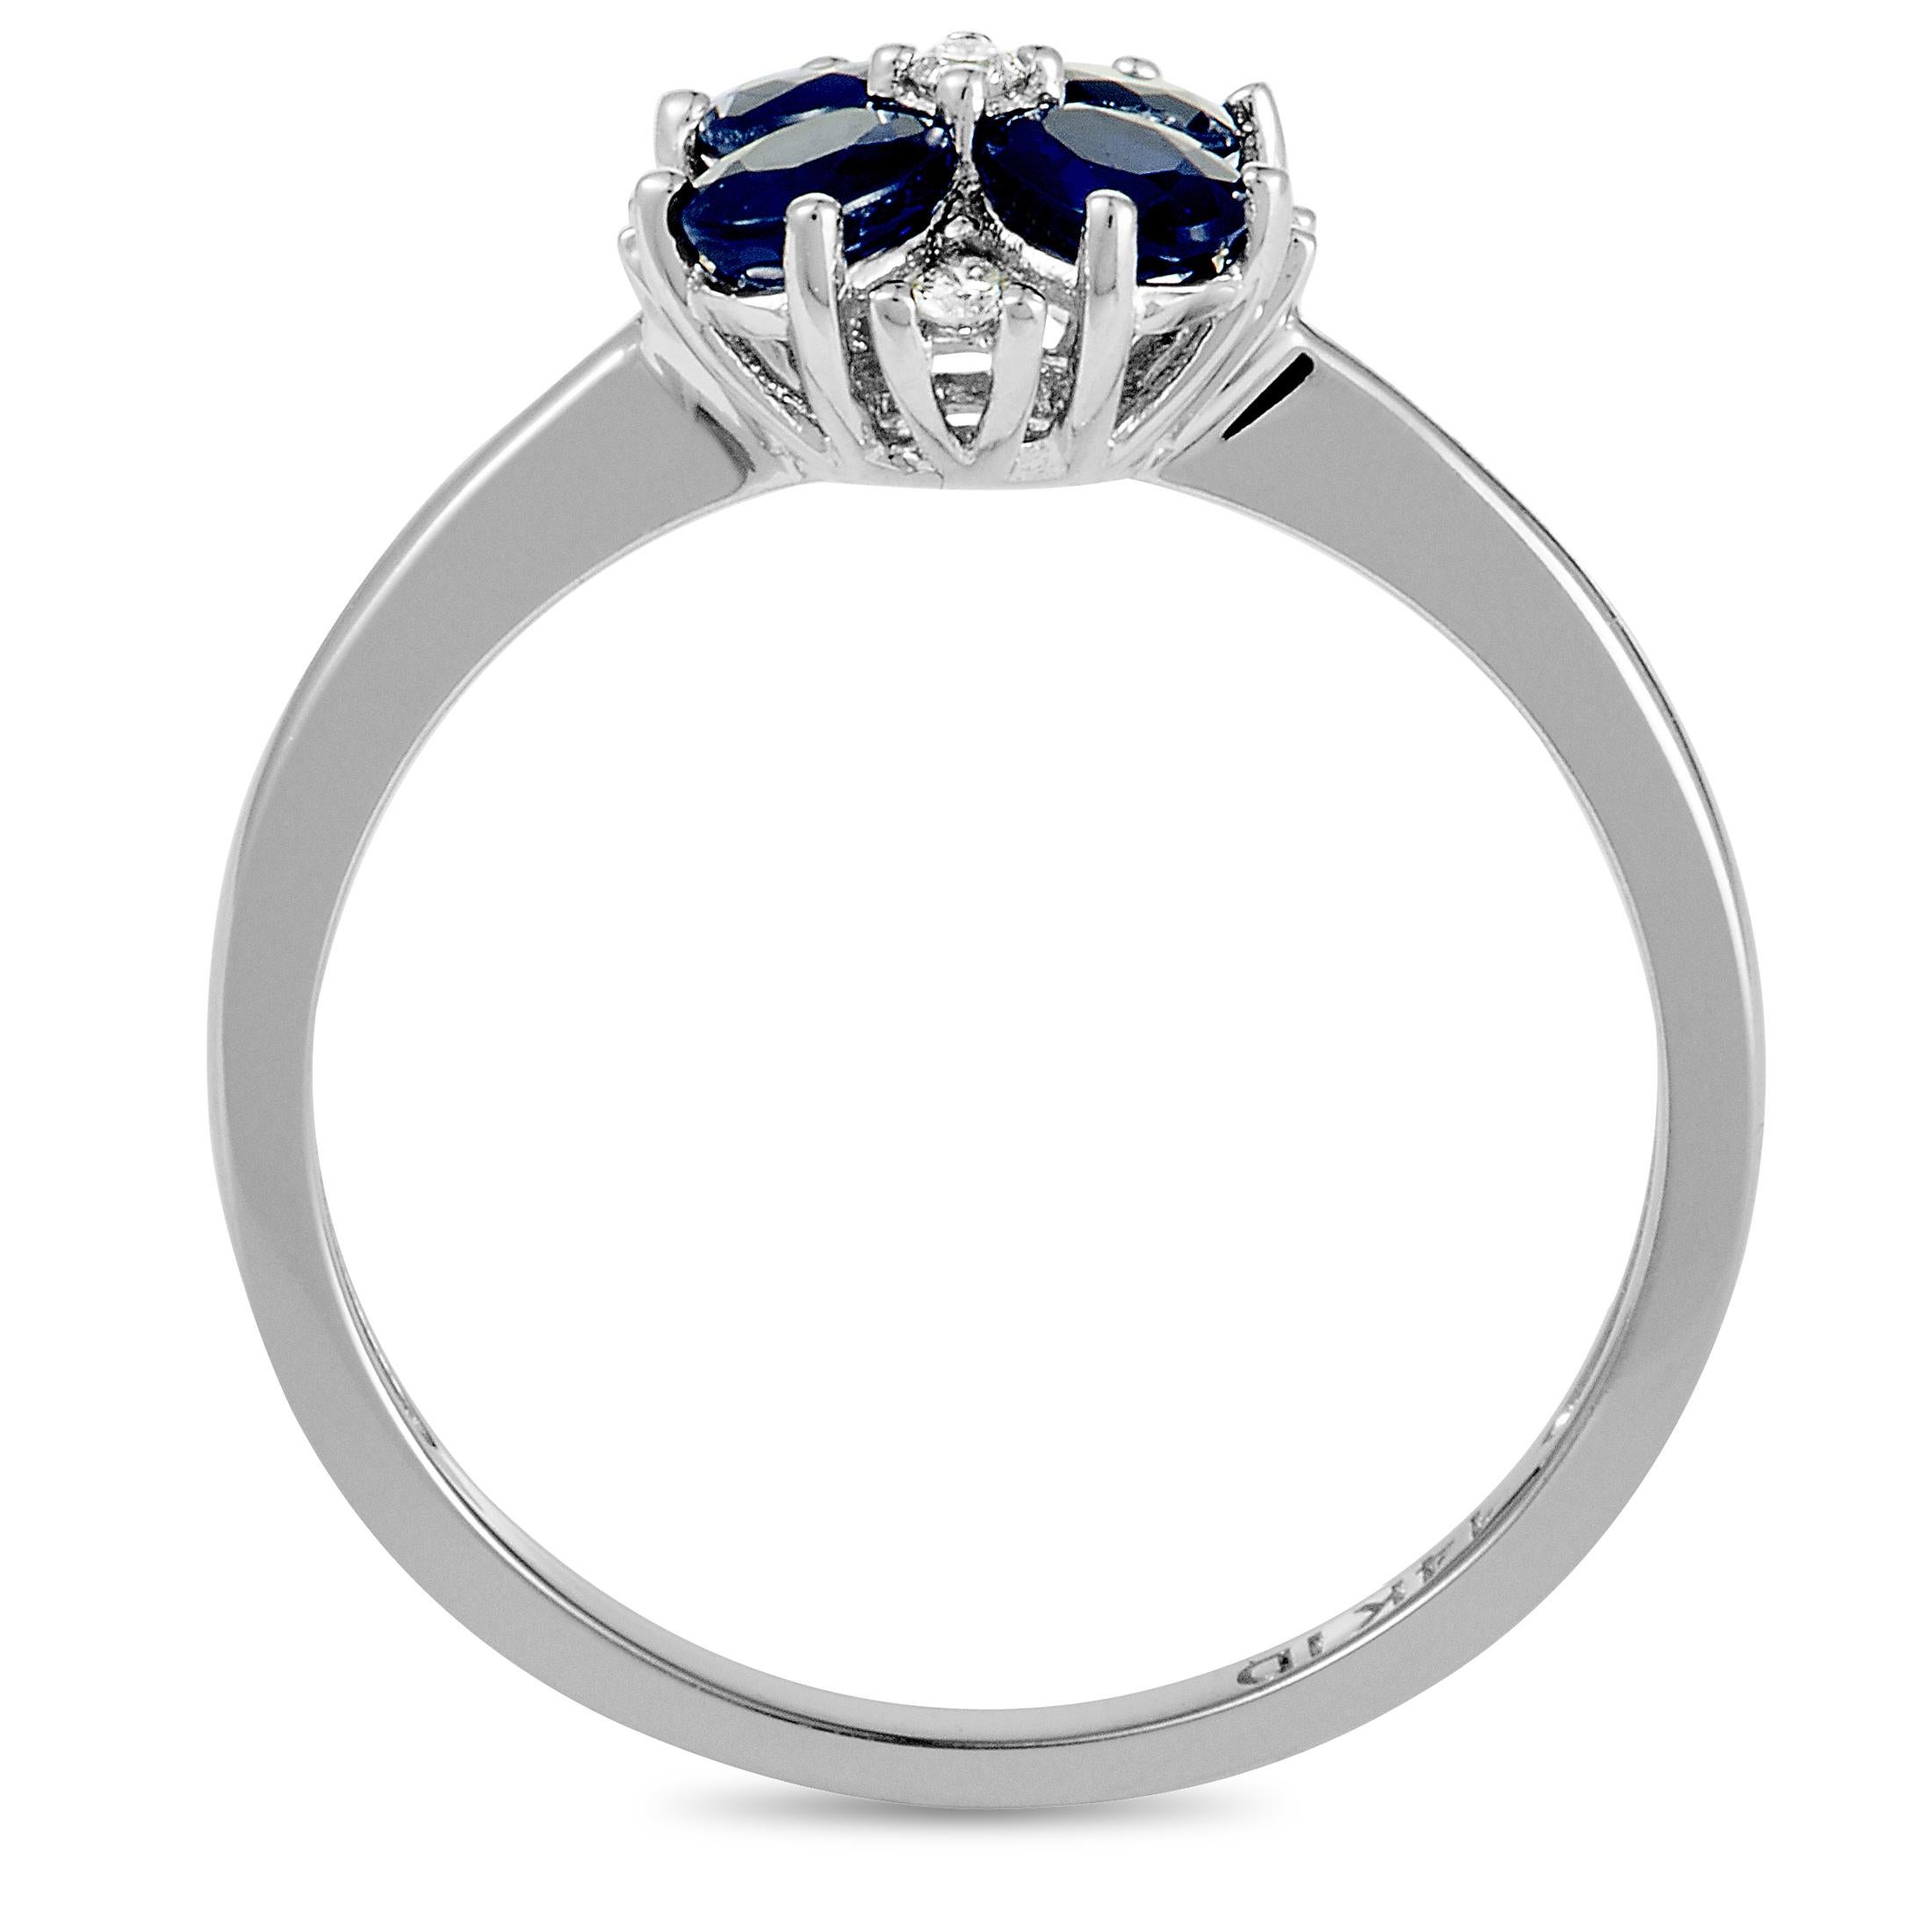 This ring is made of 14K white gold and weighs 2 grams, boasting band thickness of 1 mm and top height of 5 mm, while top dimensions measure 8 by 8 mm. The ring is set with sapphires and with a total of 0.08 carats of diamonds.
 
 Offered in brand